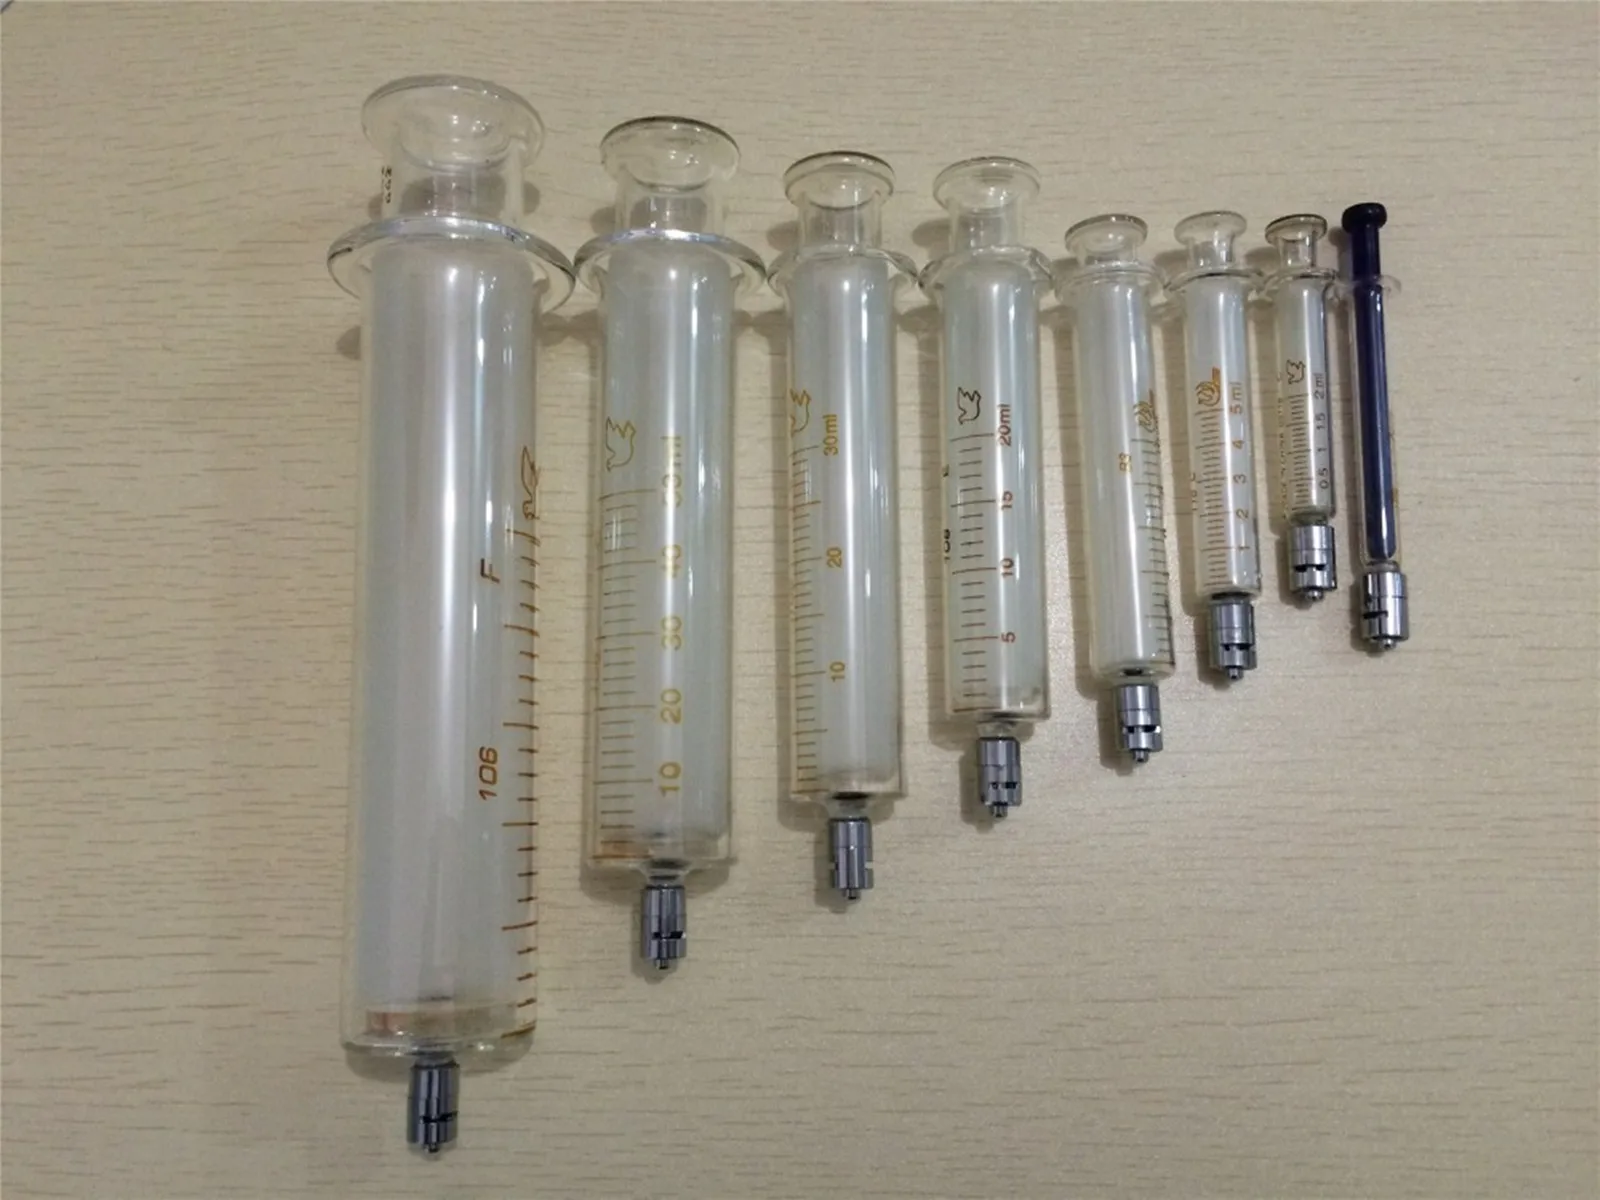 

1ml 2ml 5ml 10ml 20ml 30ml 50ml 100ml Glass Syringe Luer Lock Injector Lab Glassware Recycling Sampler For Experiment